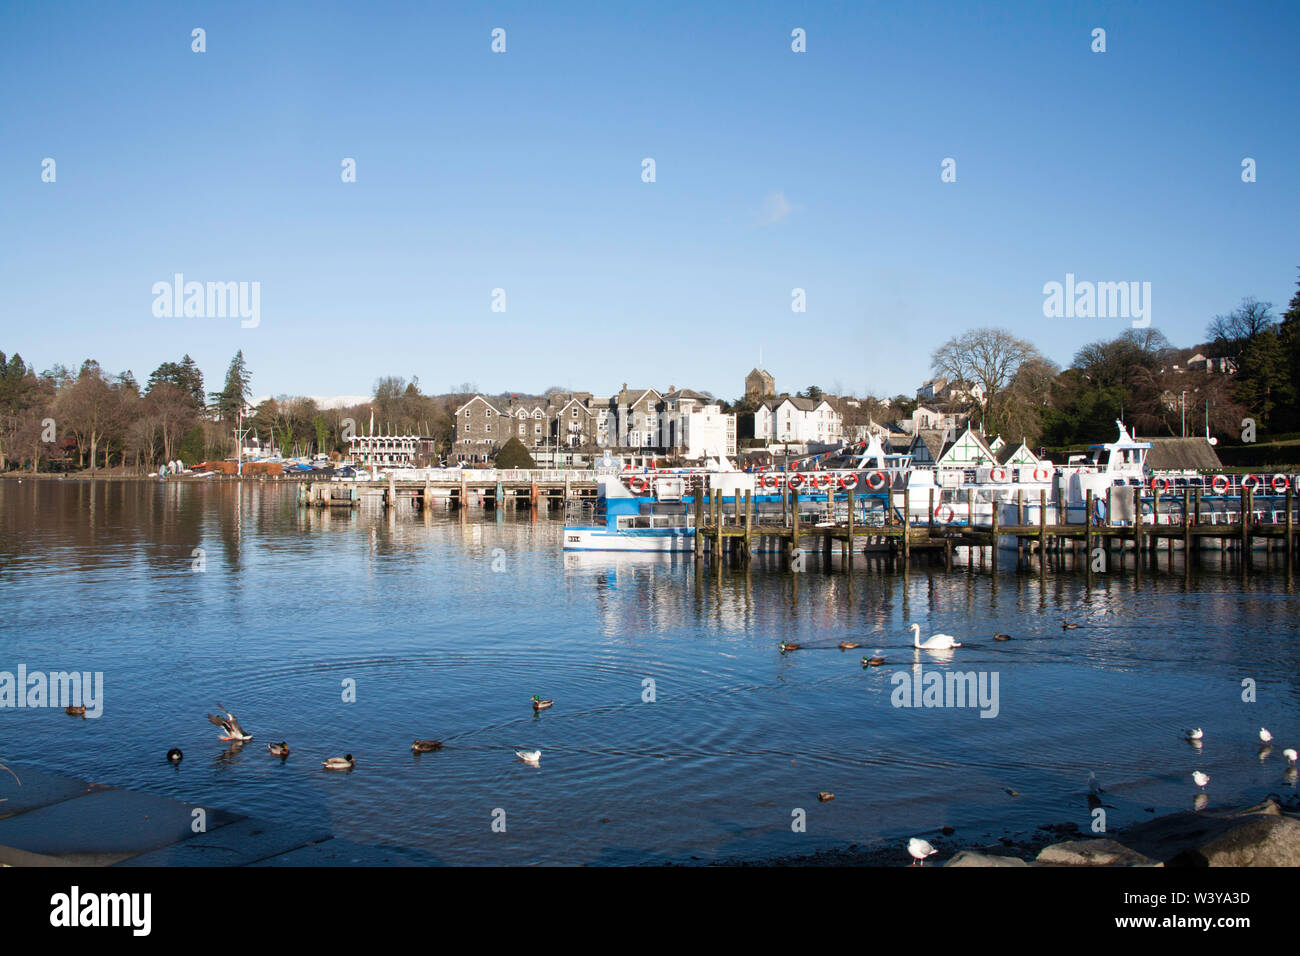 Die MacDonald Old England Hotel Bowness on Windermere Cumbria Lake District, England Stockfoto